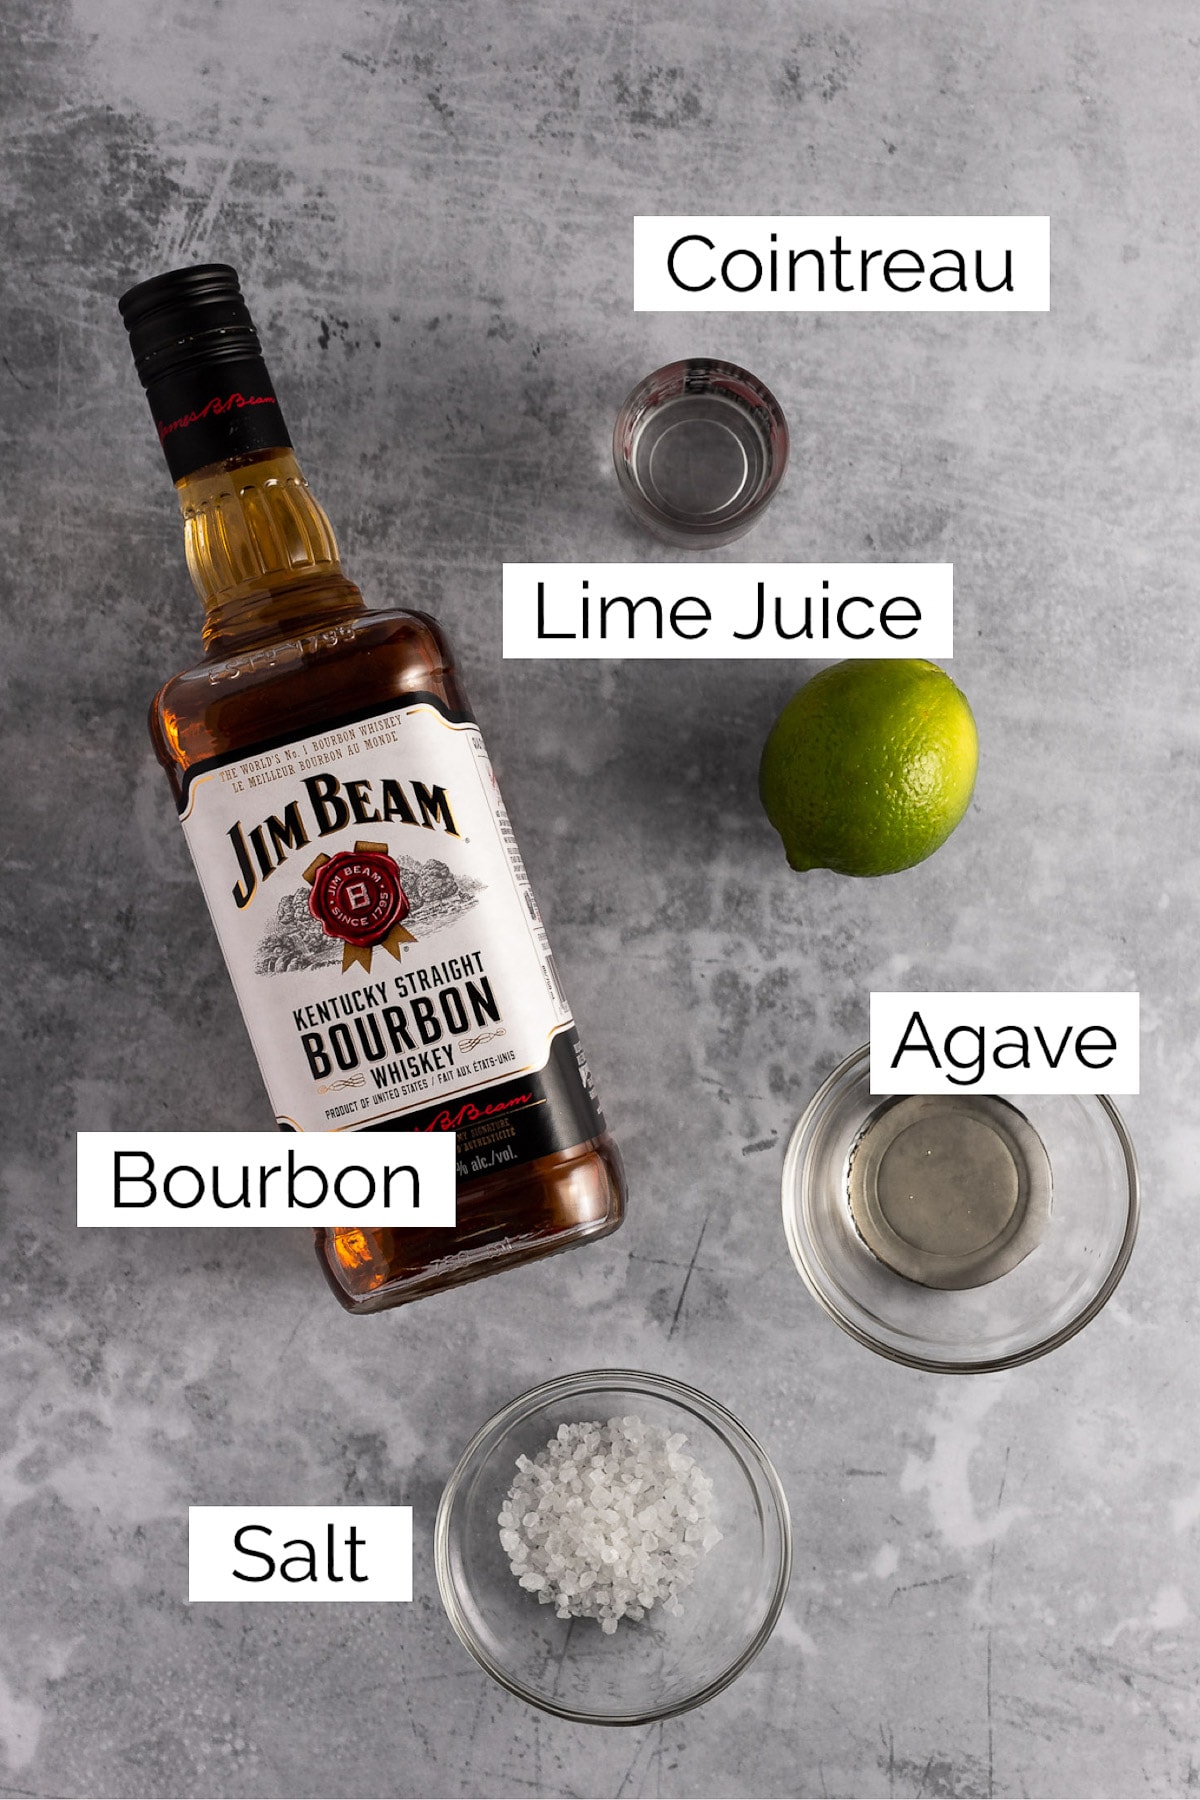 Overhead view of the ingredients needed to make the cocktail.